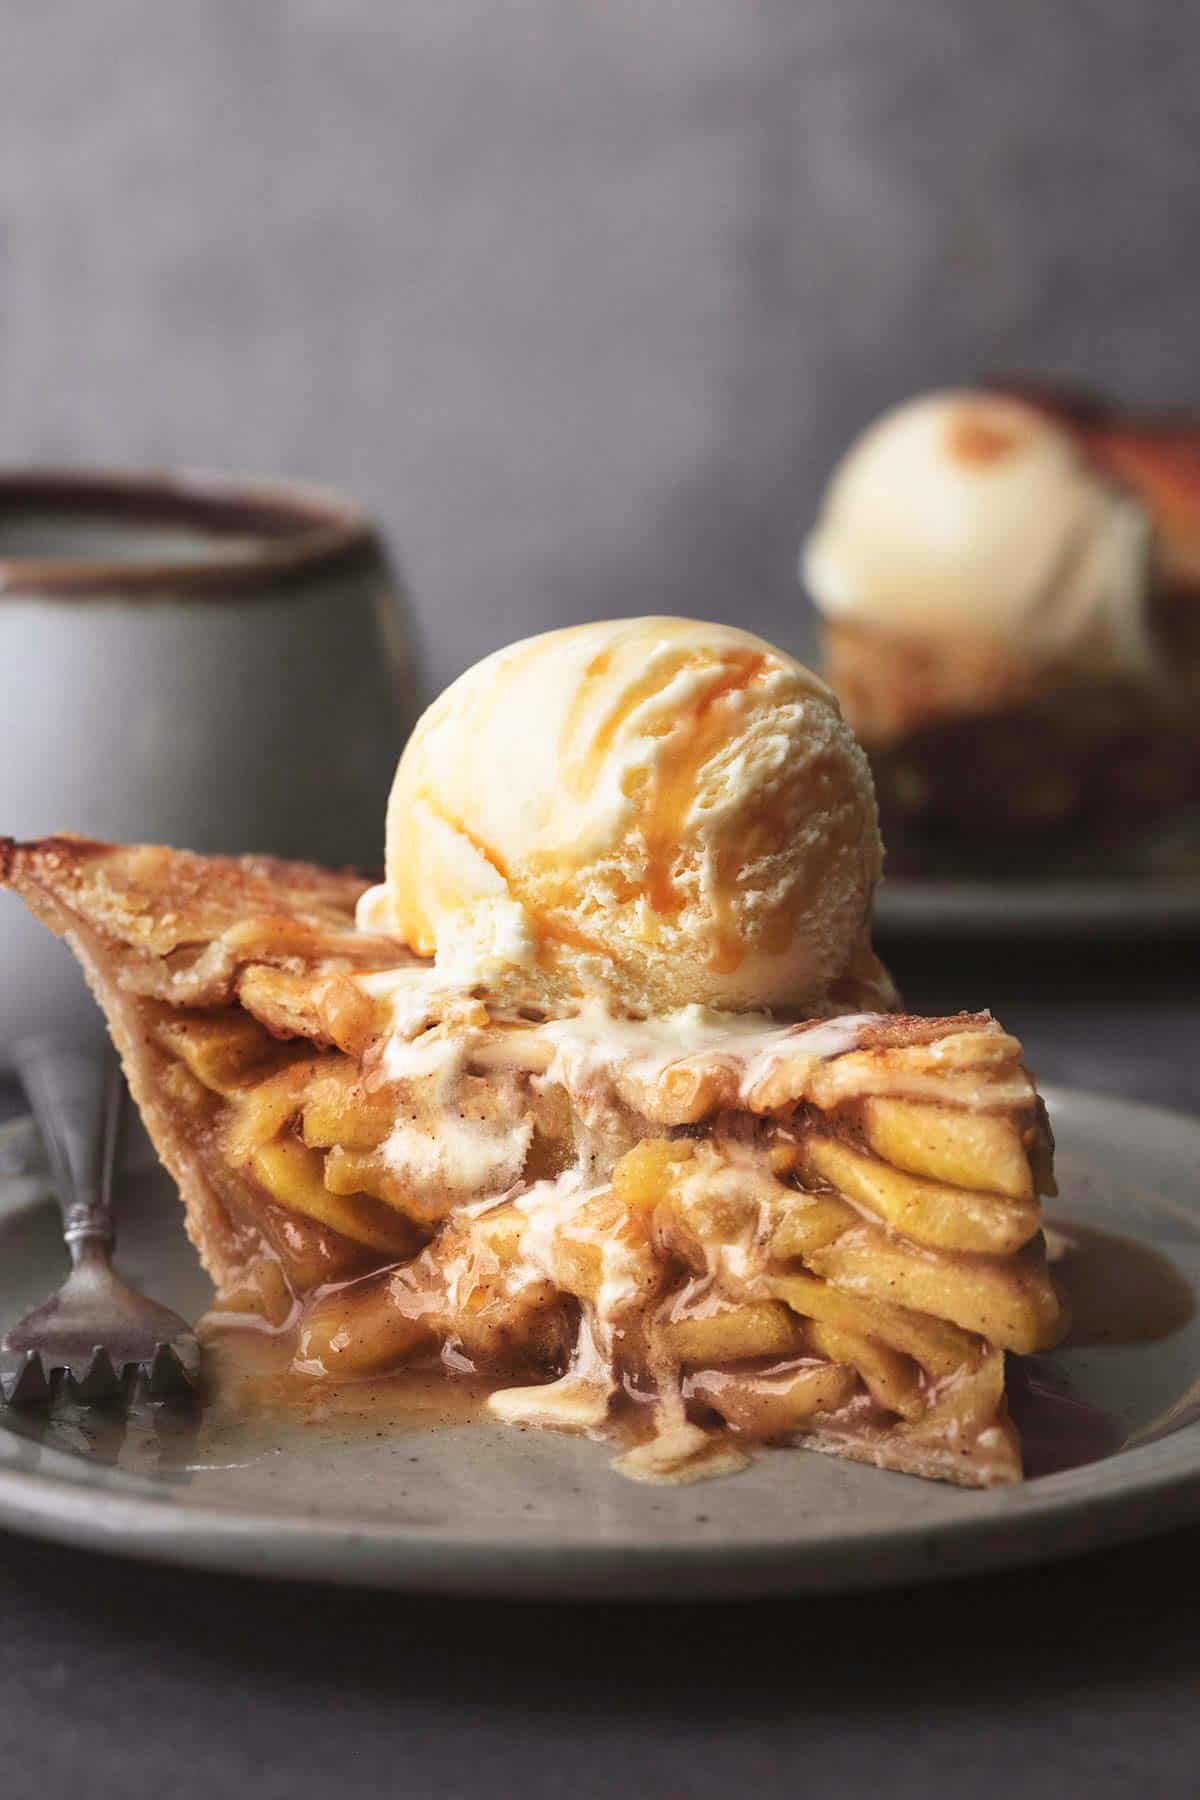 a slice of apple pie with ice cream on top on a plate.